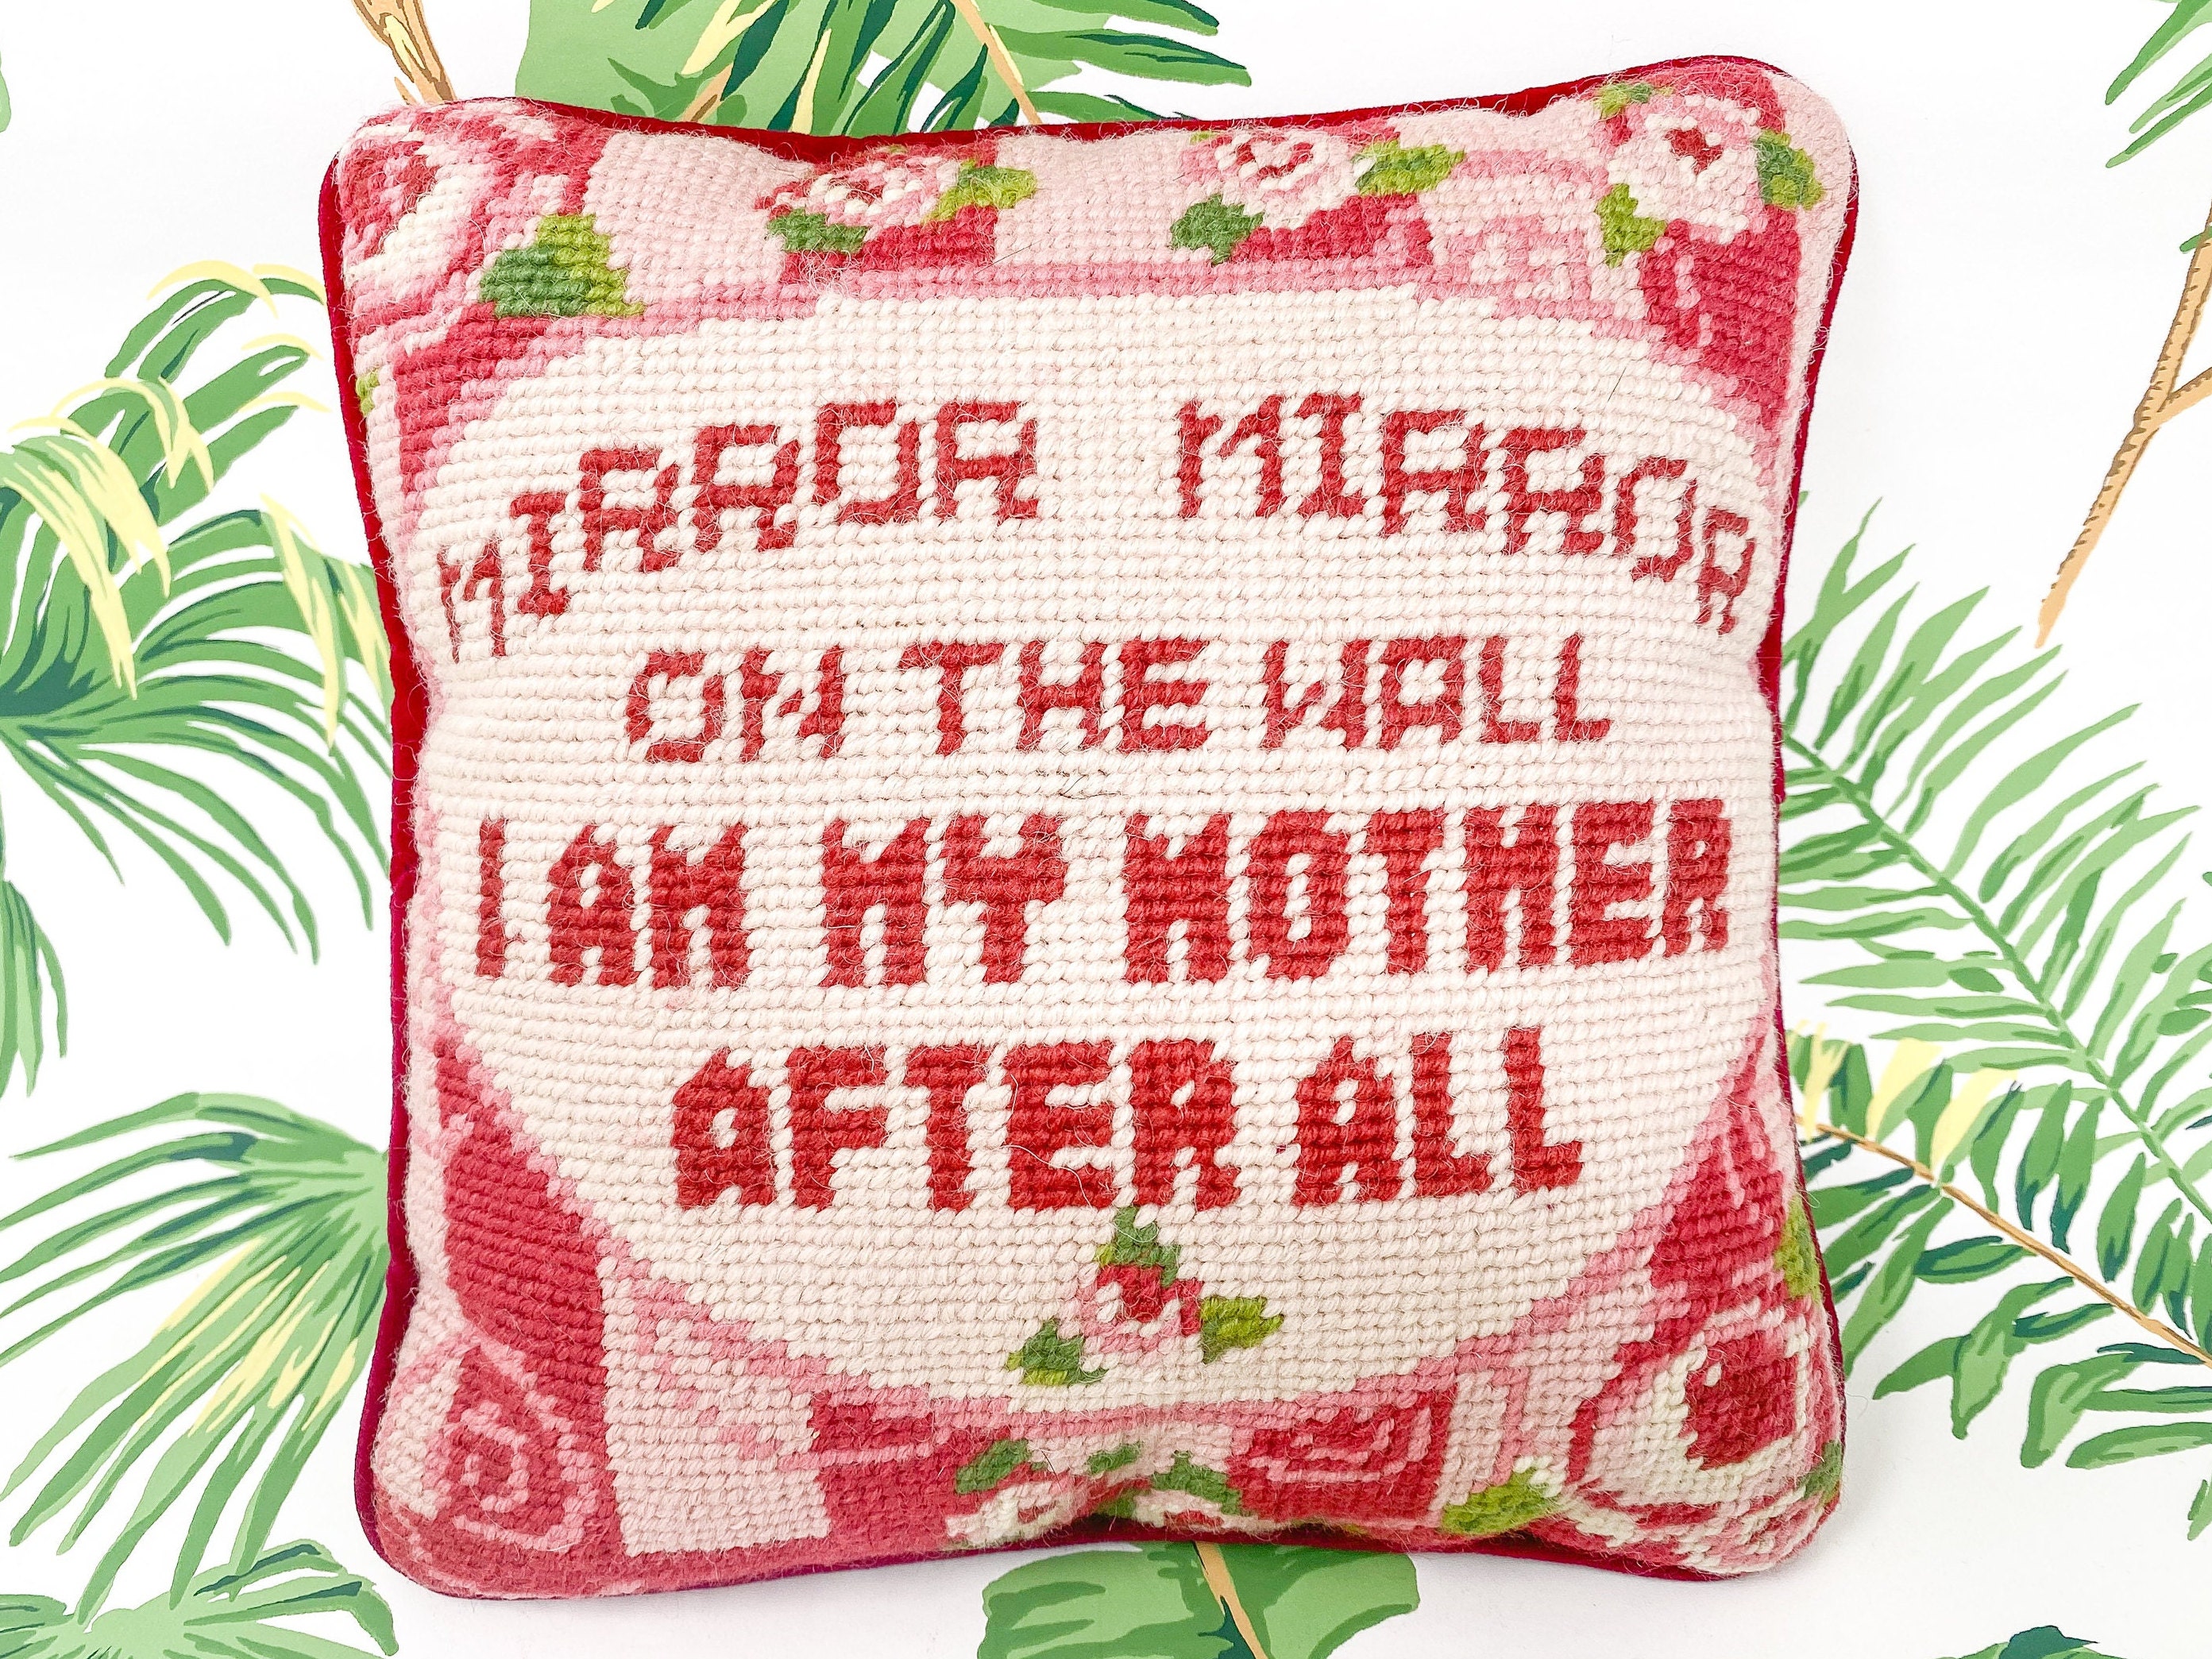 Handmade Complete Needlepoint Decorative Pillows Never complain, Mirror,  Mirror, I would prefer - Special Order AS